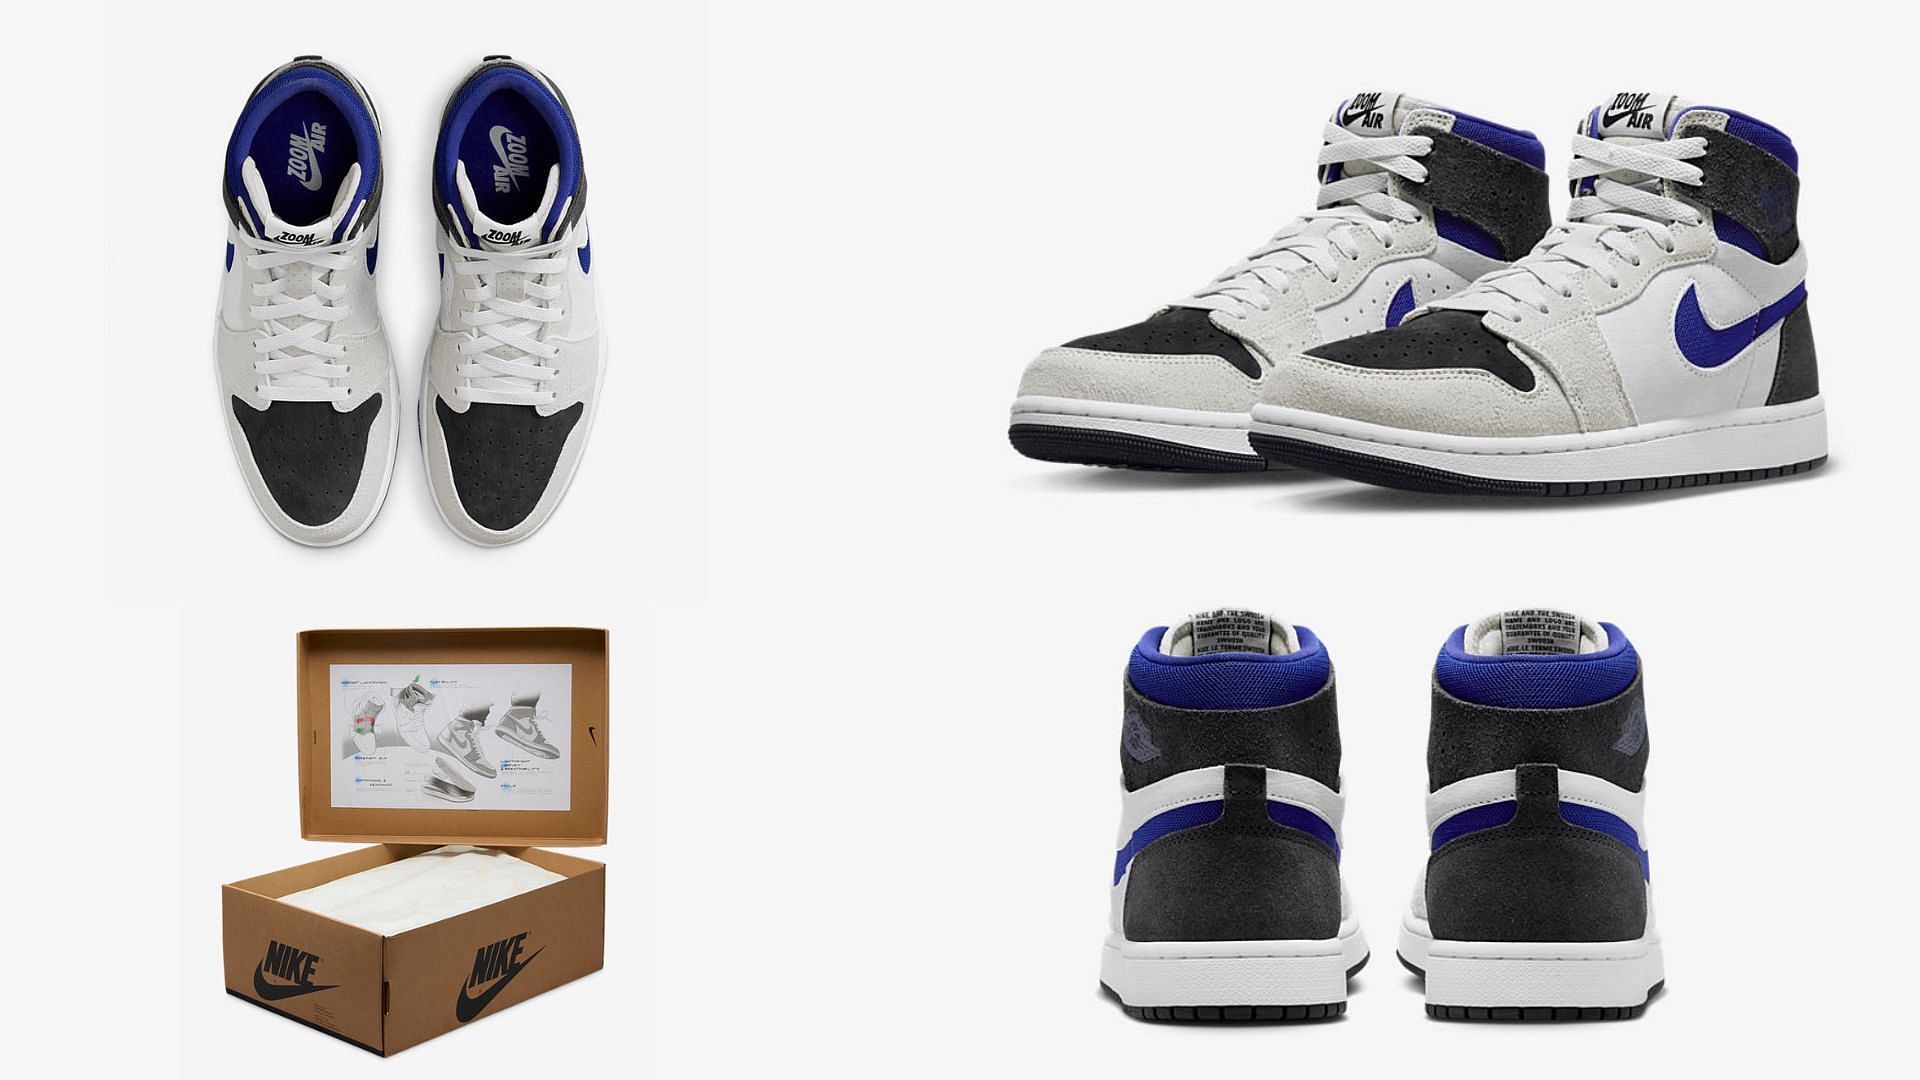 Take a closer look at the Air Jordan 1 High CMFT 2 Concord shoe (Image via YouTube/@ragnoupdates)